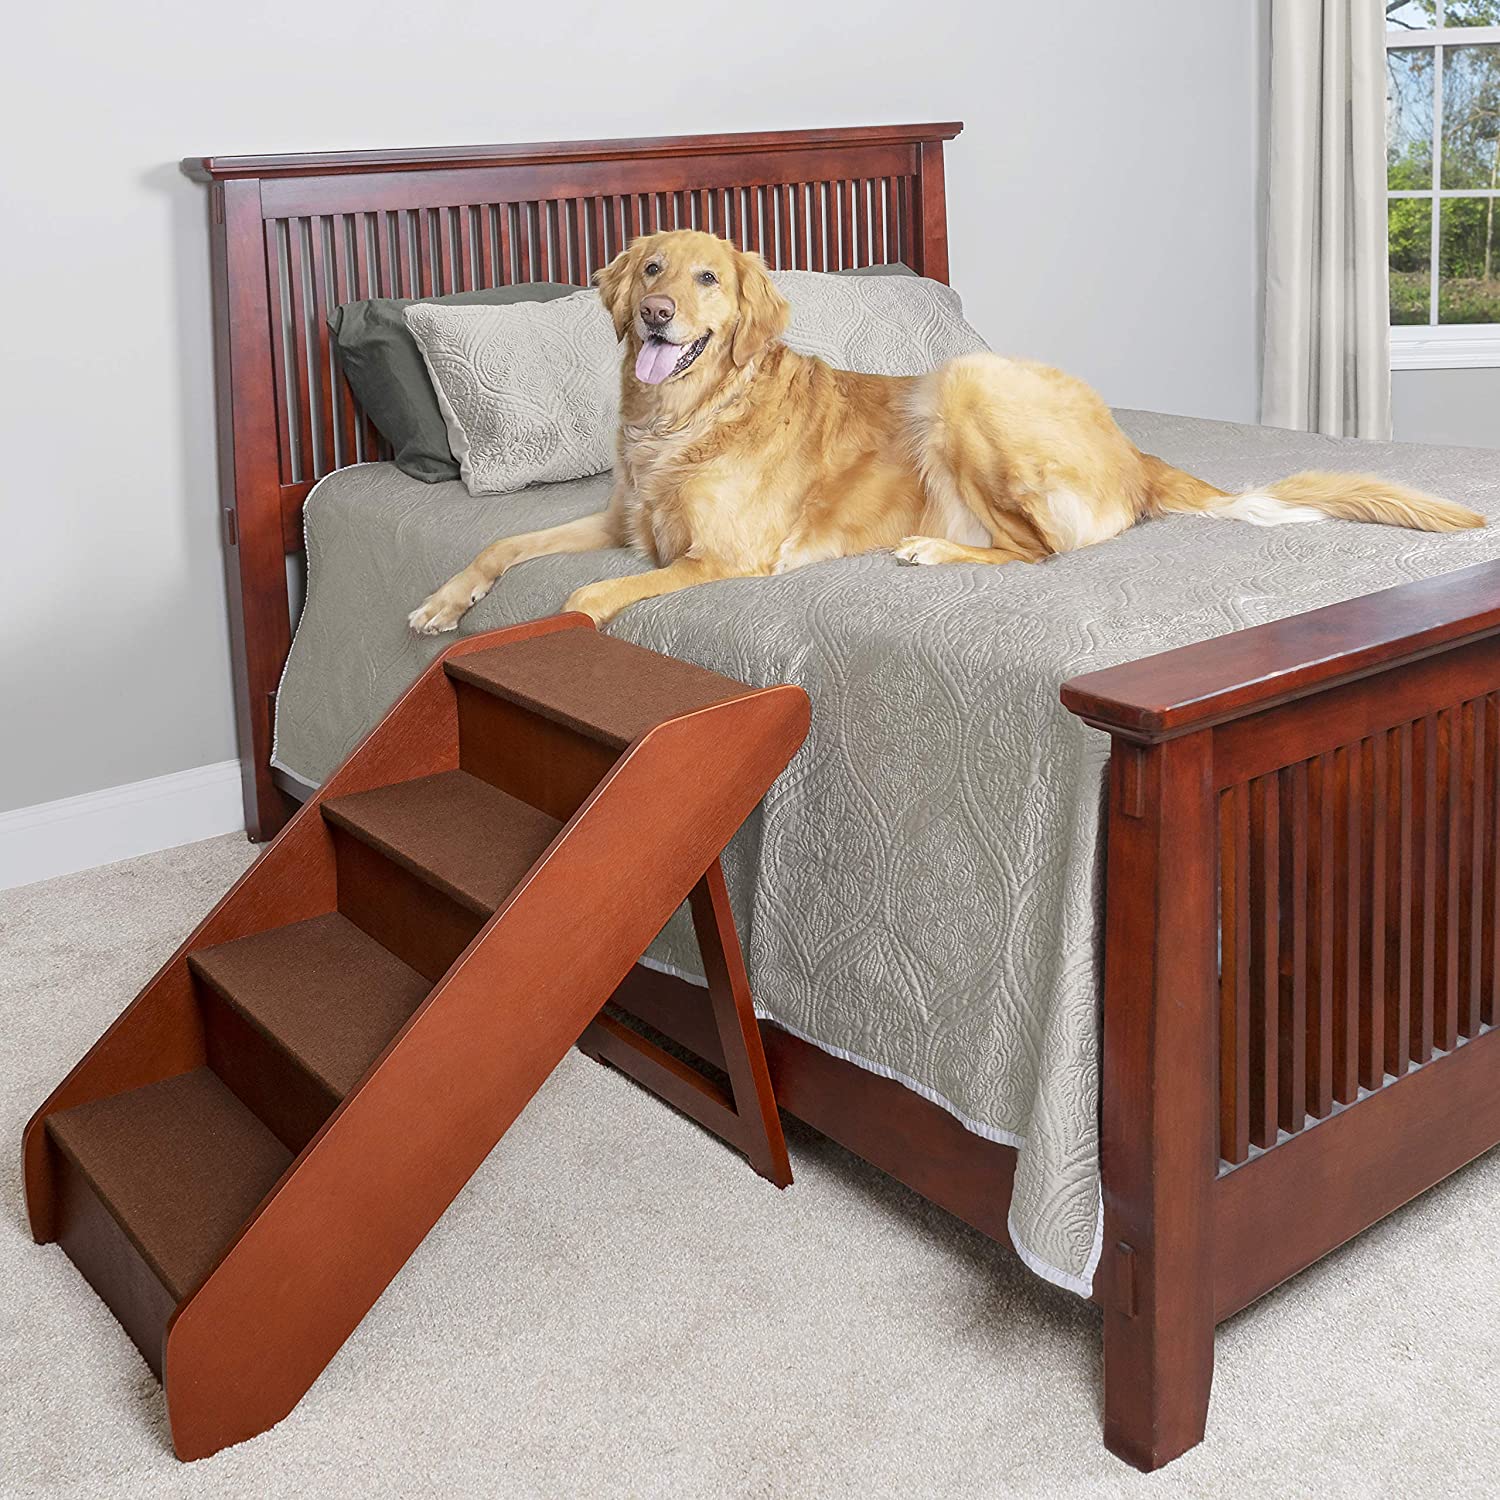 PetSafe Solvit PupSTEP Wood Pet Stairs for Dogs and Cats